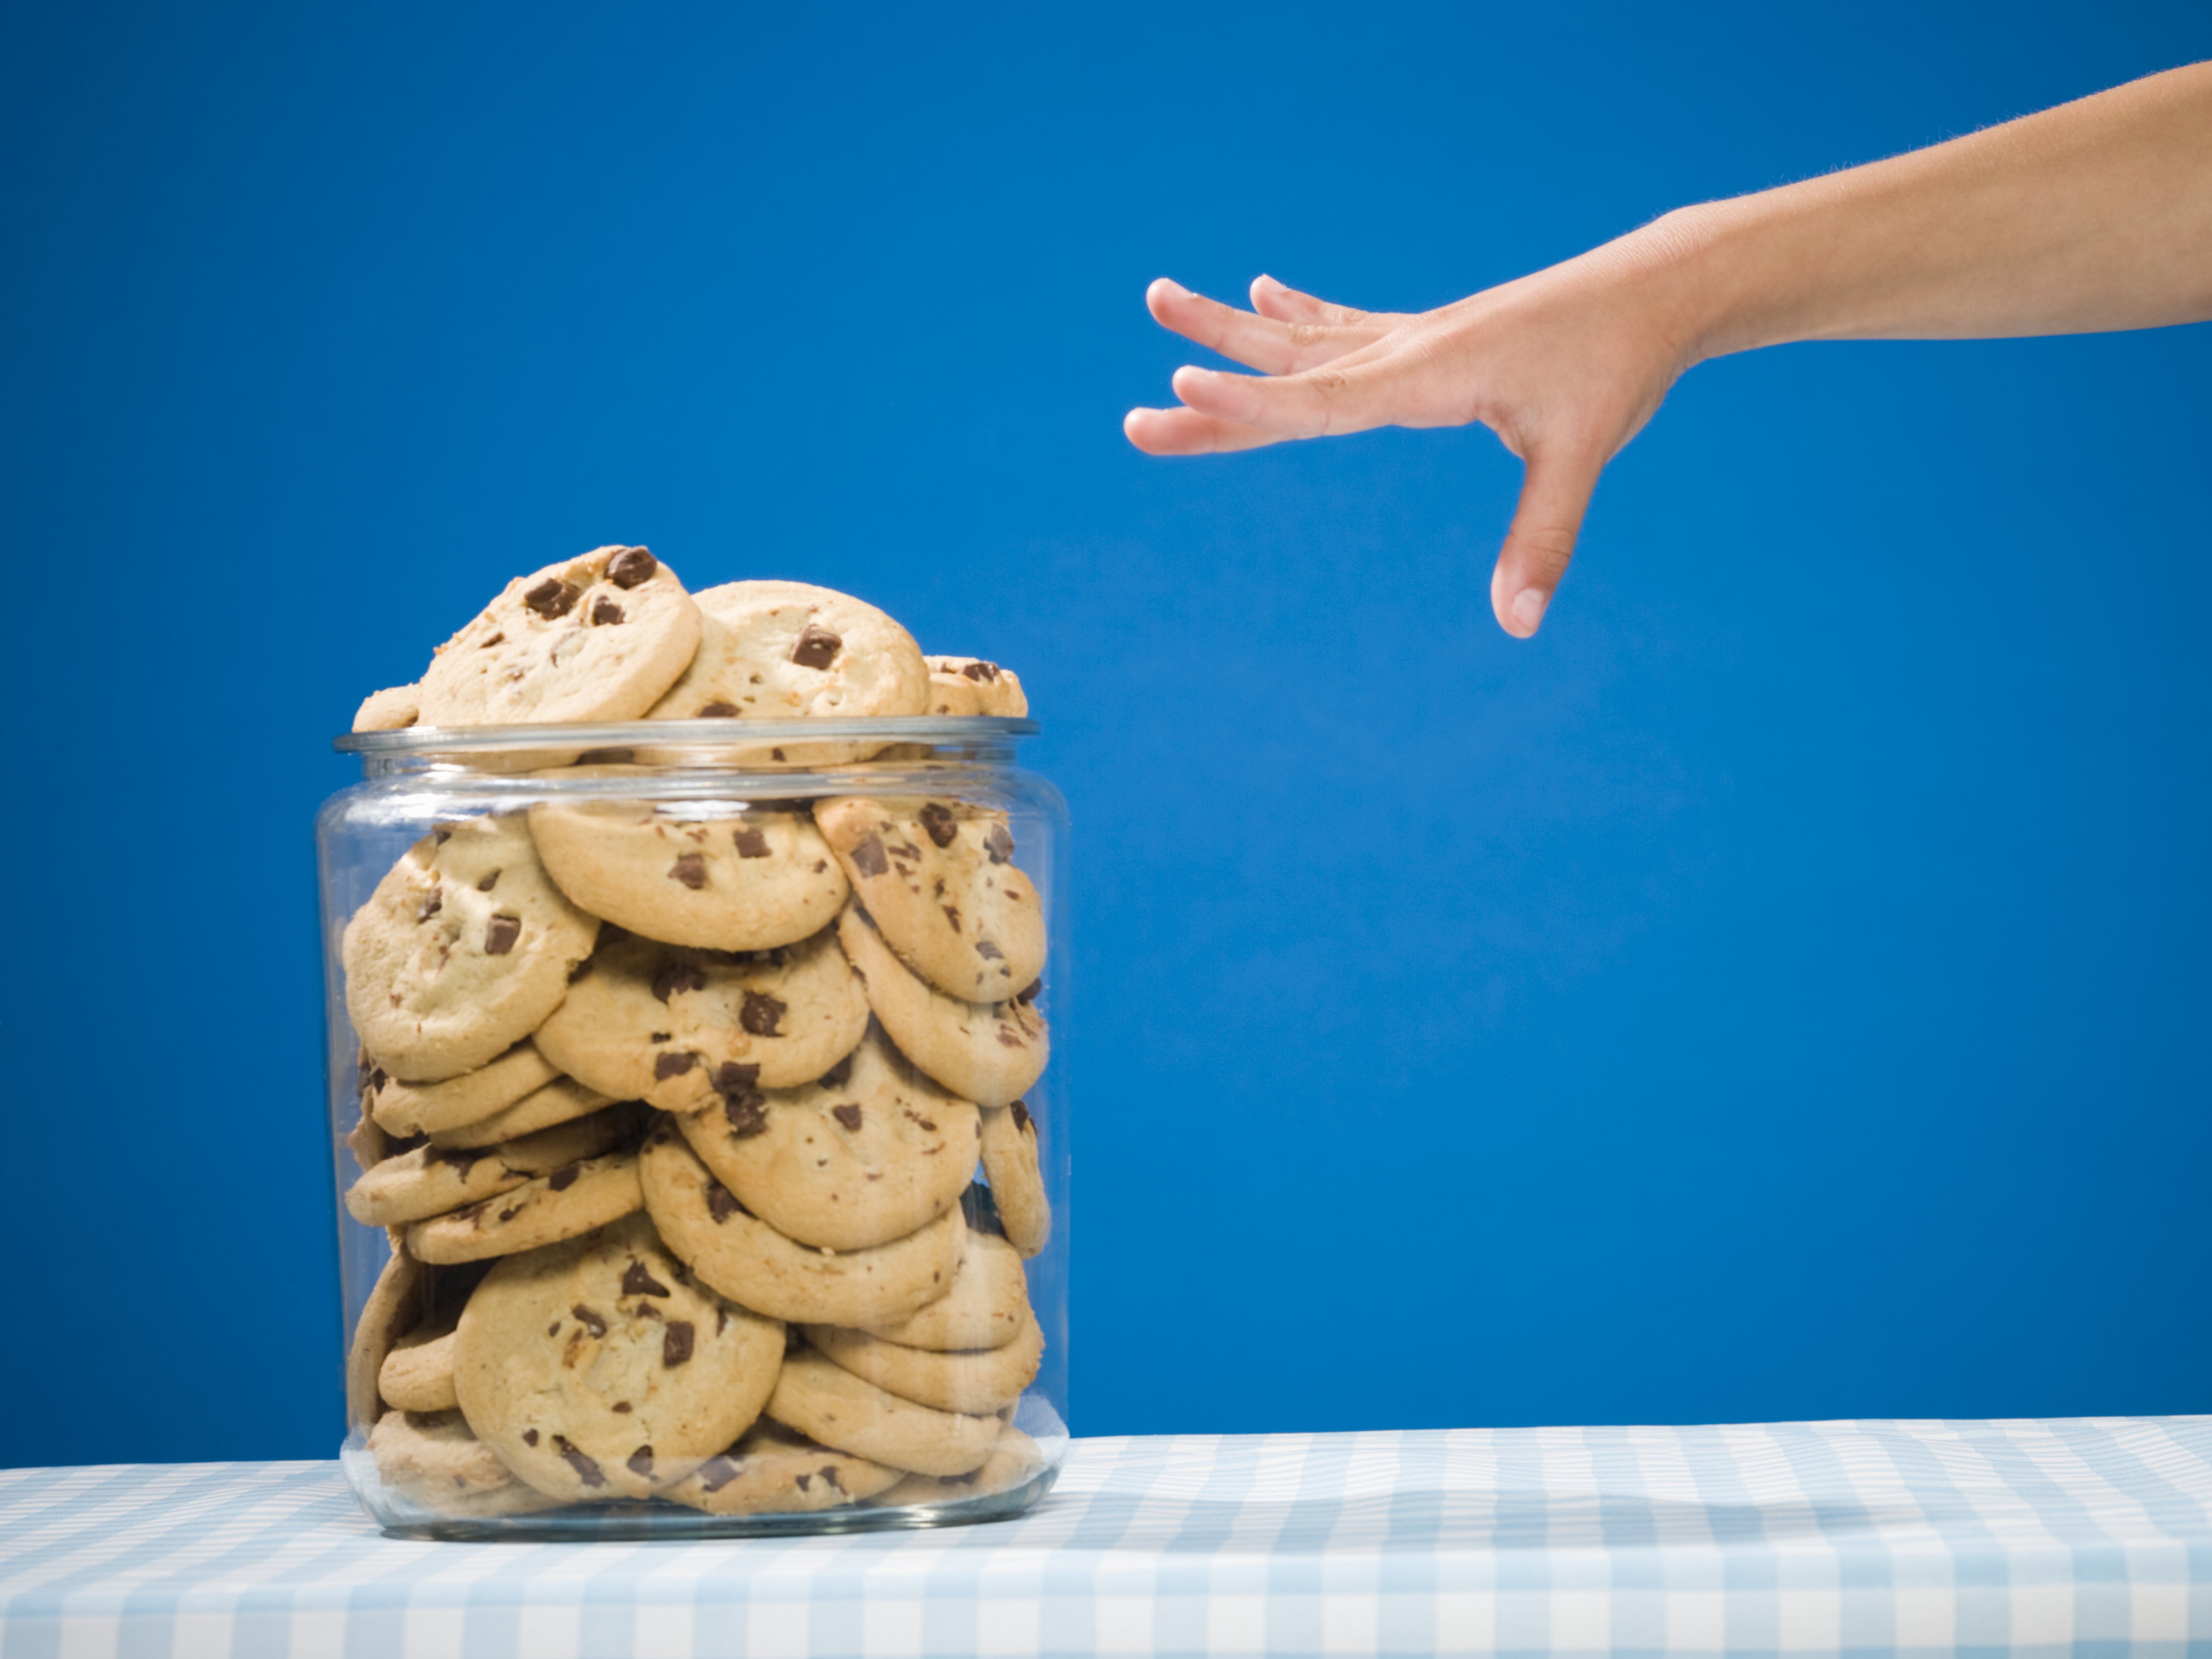 Hand reaching for chocolate chip cookie jar (Mike Kemp—Rubberball/Getty Images)